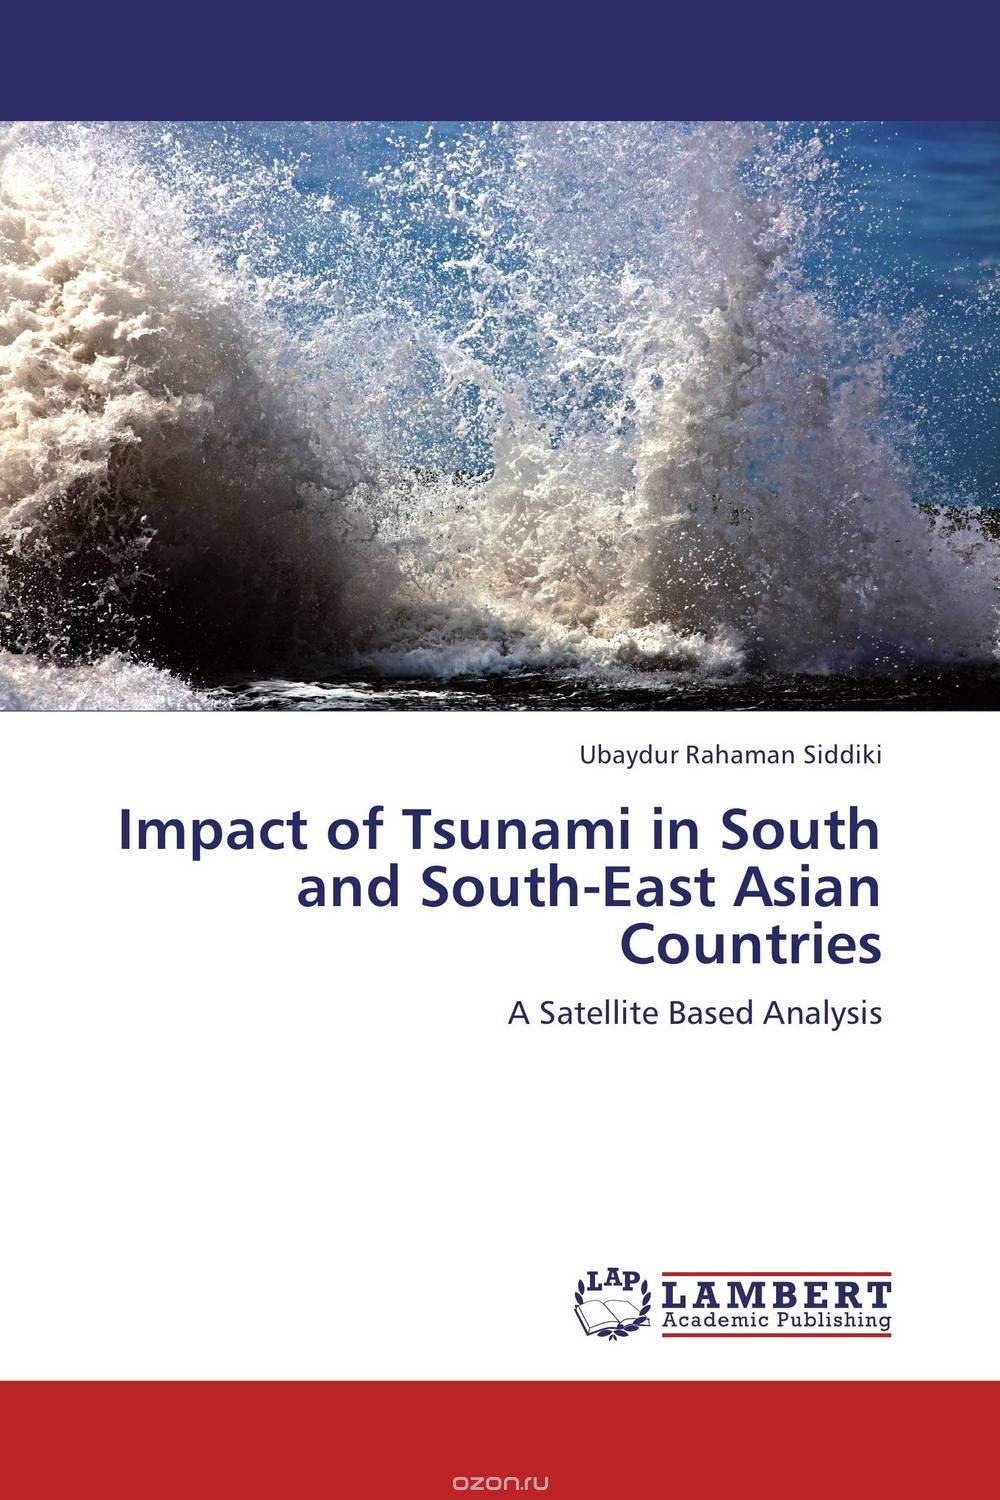 Скачать книгу "Impact of Tsunami in South and South-East Asian Countries"